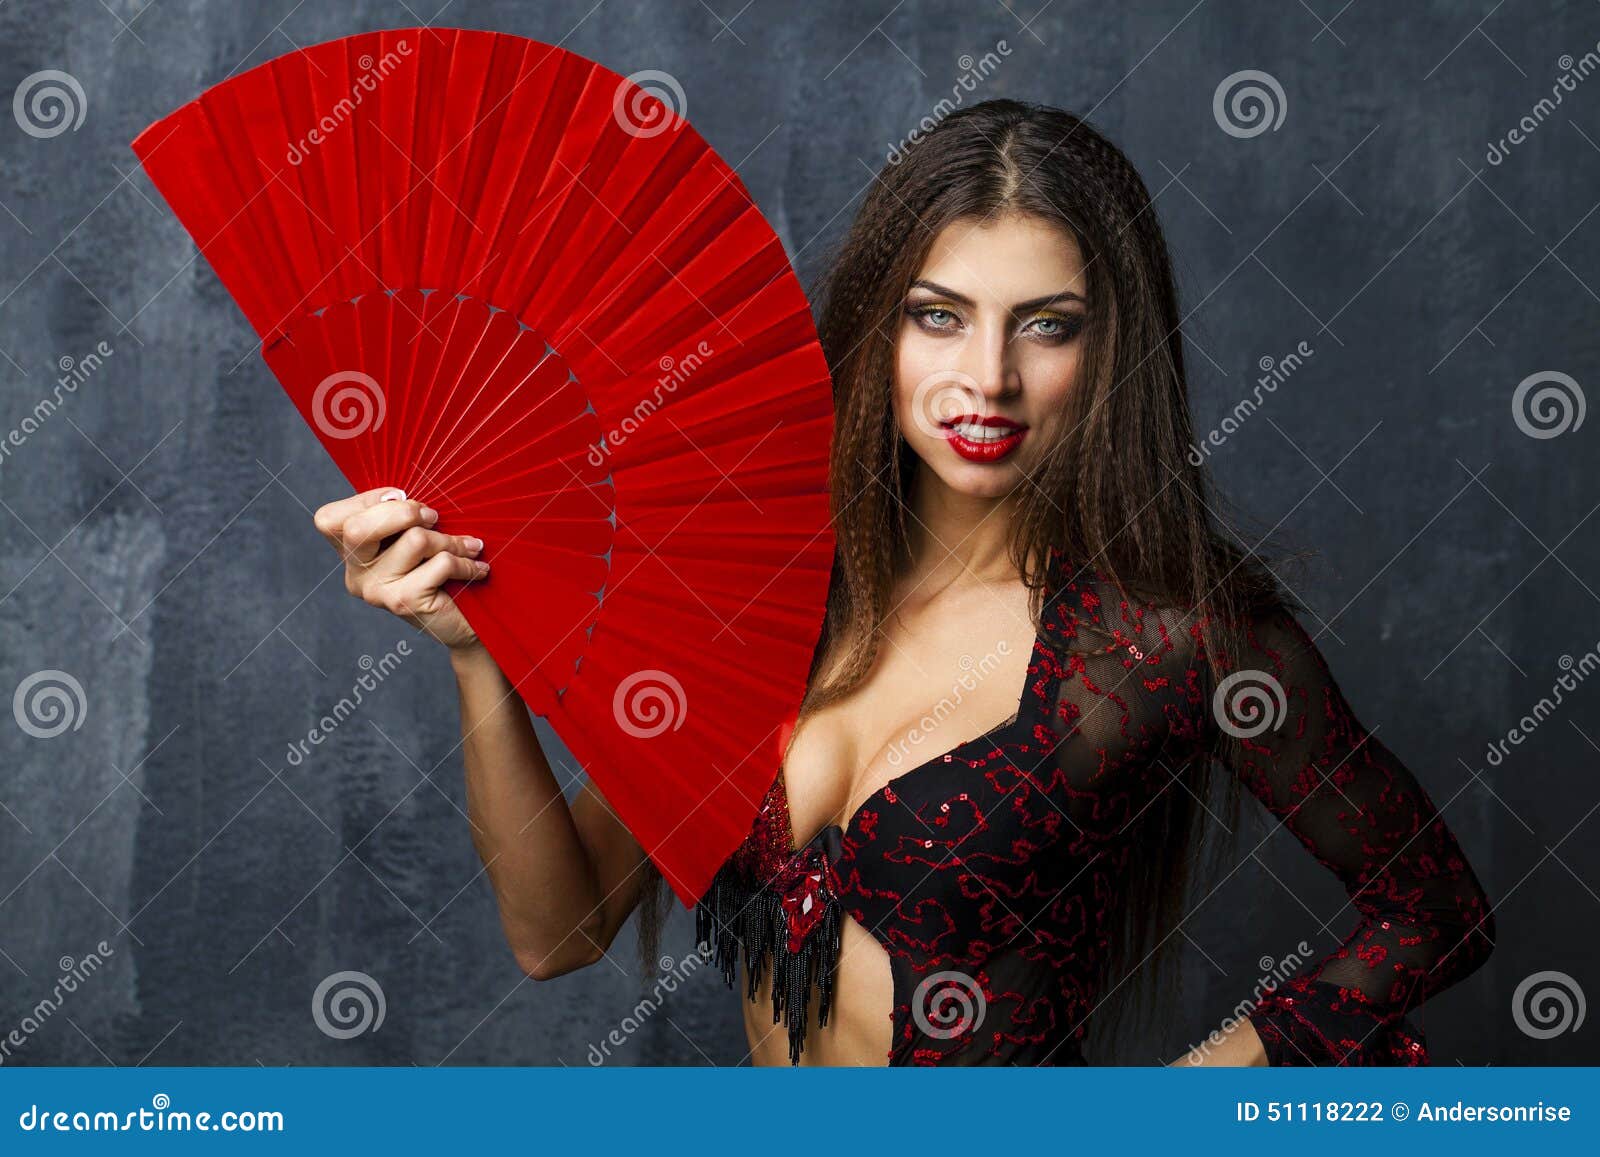 Woman Traditional Spanish Flamenco Dancer Dancing In A Red Dress Stock